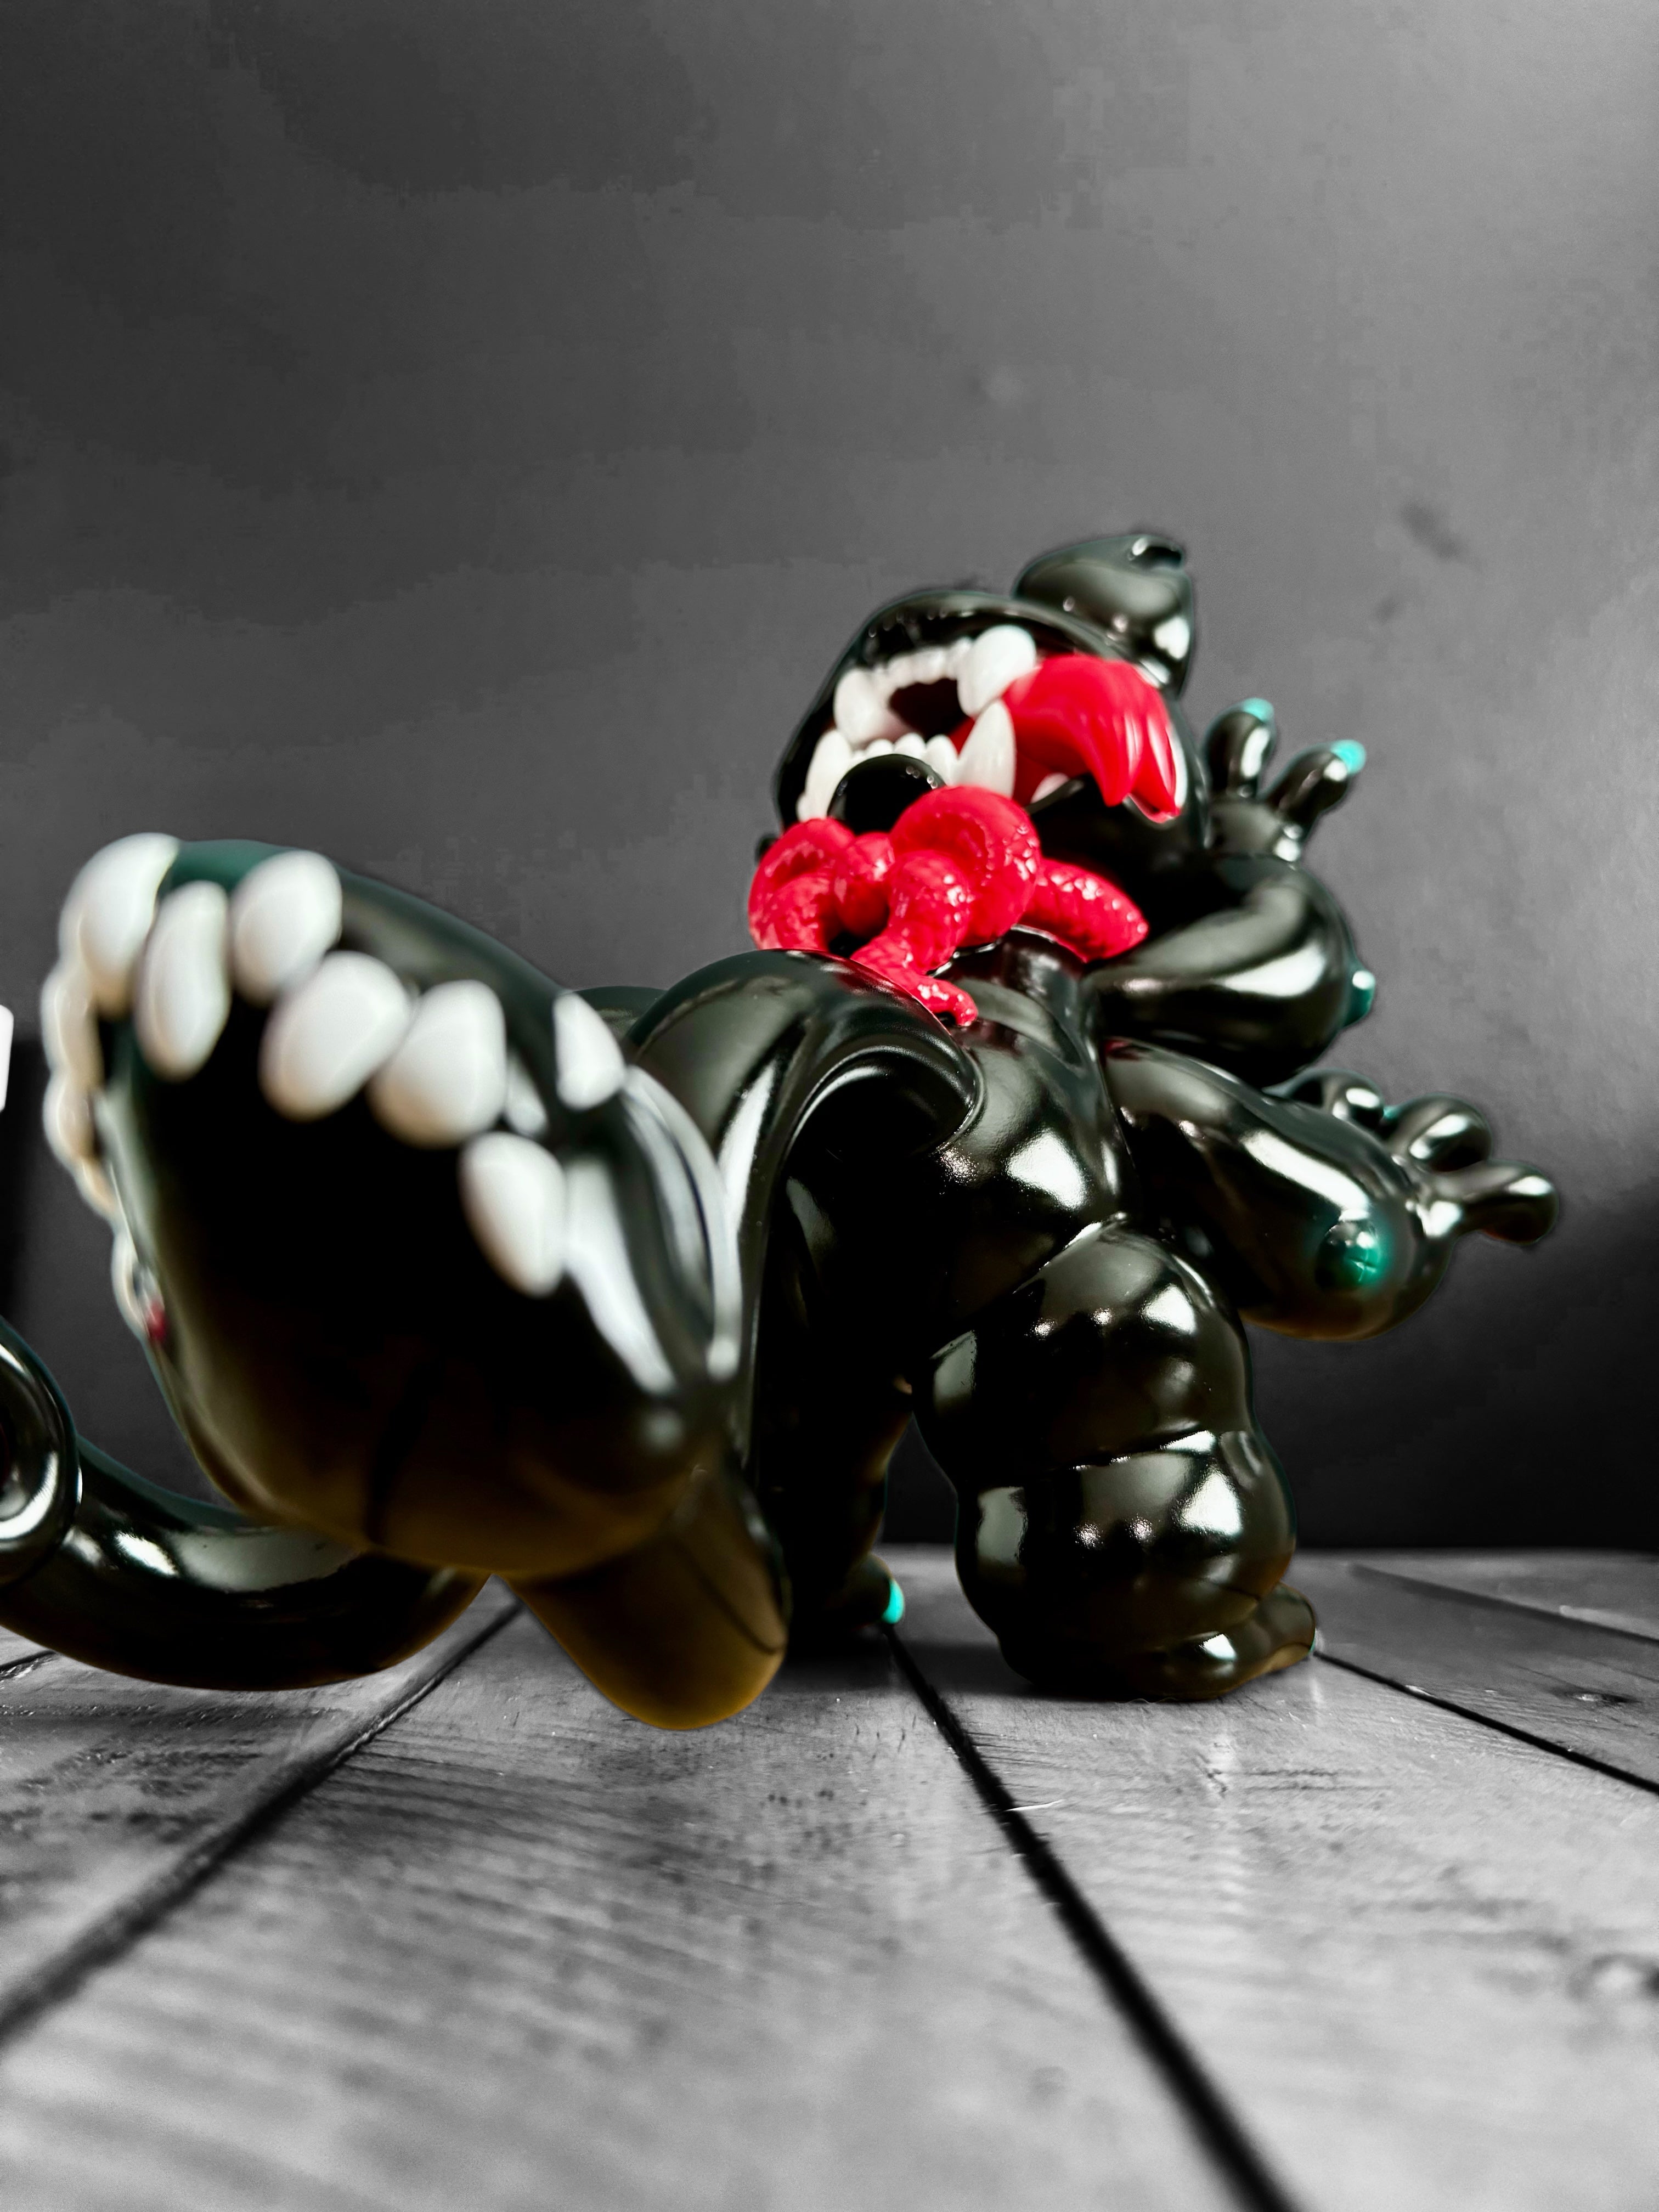 A vinyl toy of DAINIGIRUJIN Black Ver. by Grape Brain, 8 inches tall, 9.5 inches long, limited to 100pcs. Close-up of black toy with white teeth and a red snake.